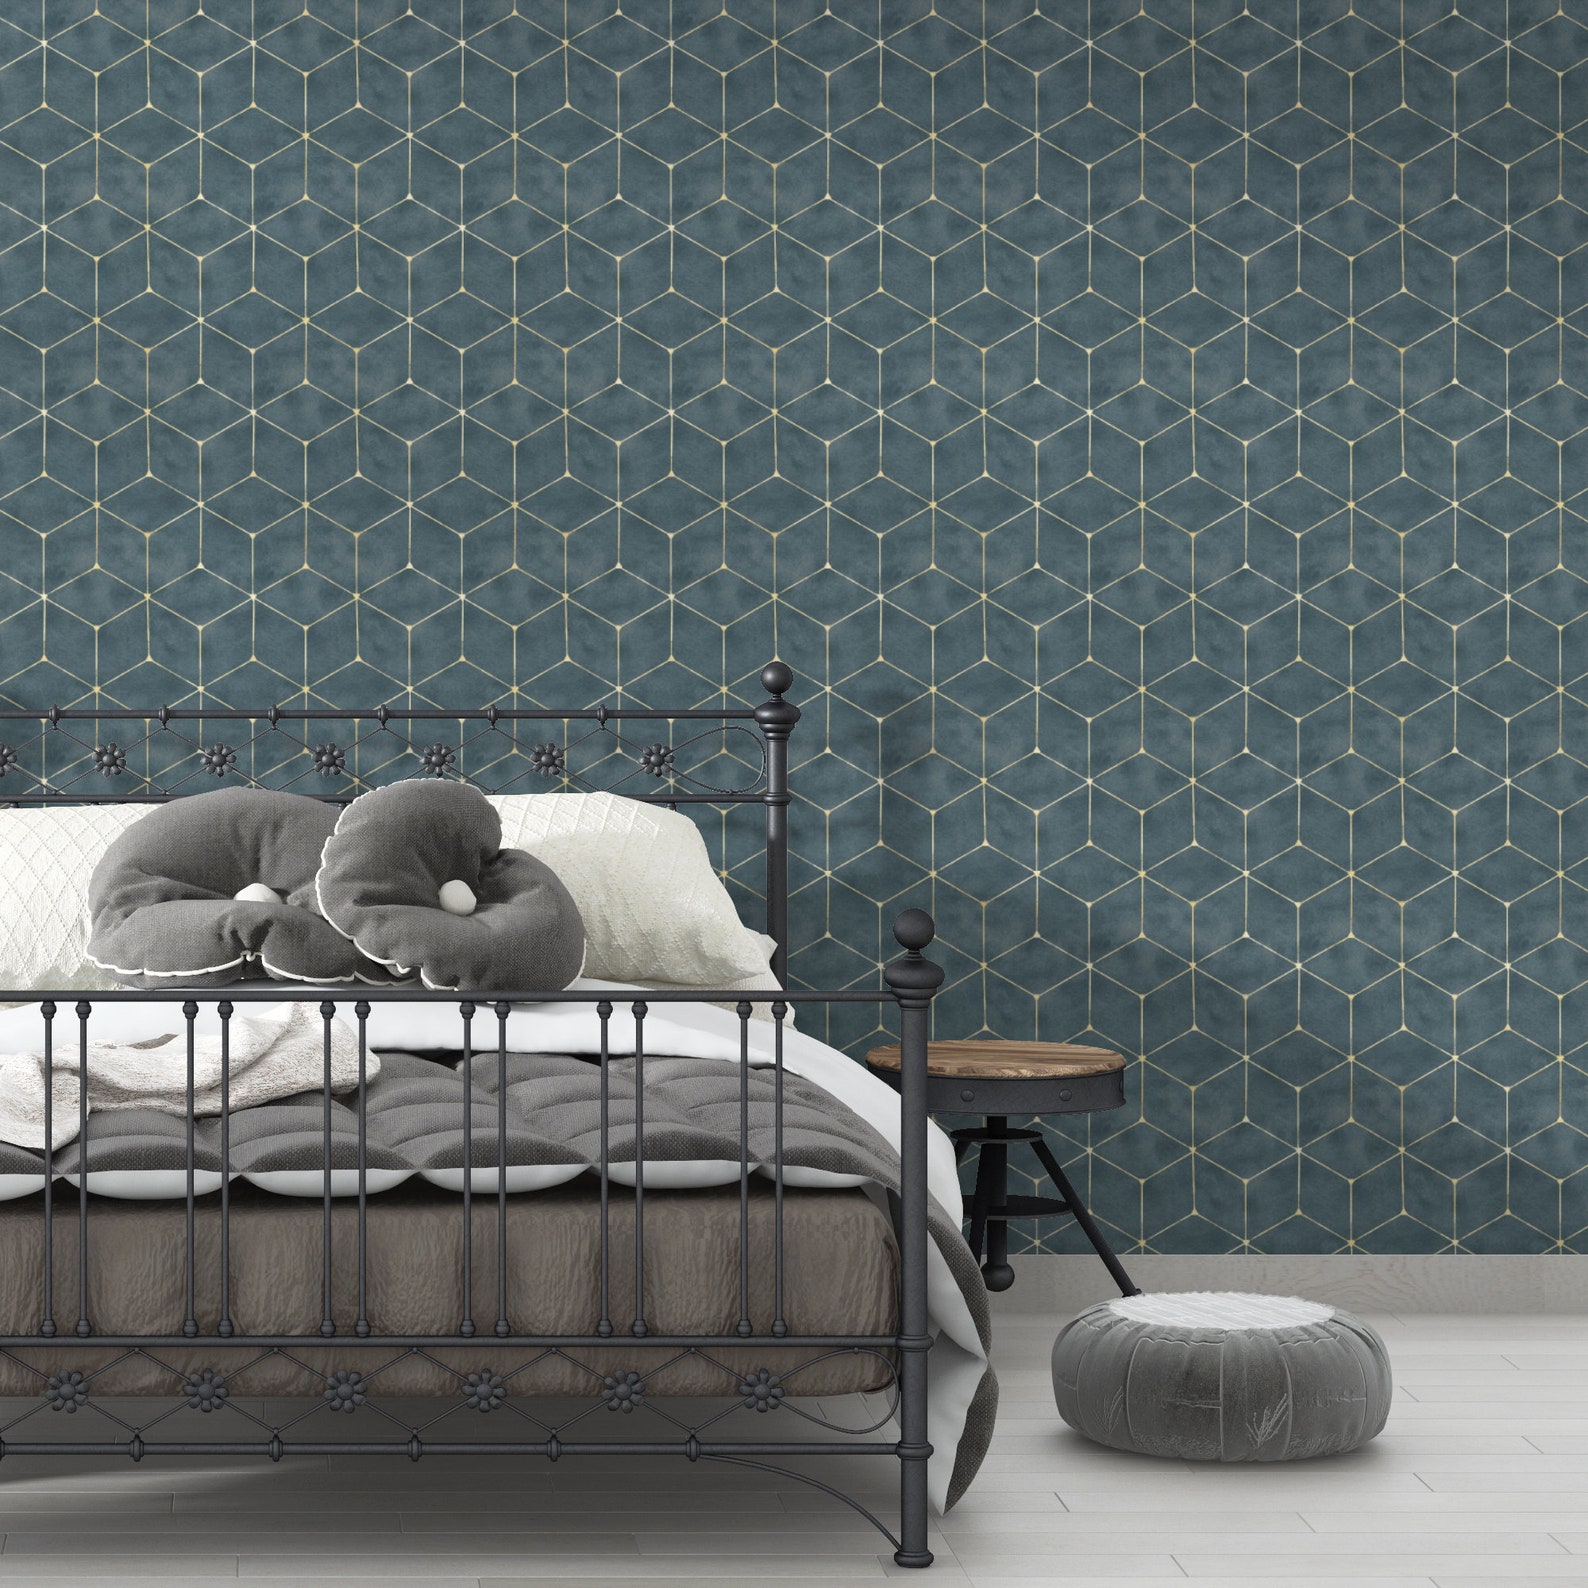 Geometric Grey Hexagon Peel and Stick Wallpaper Removable - Etsy